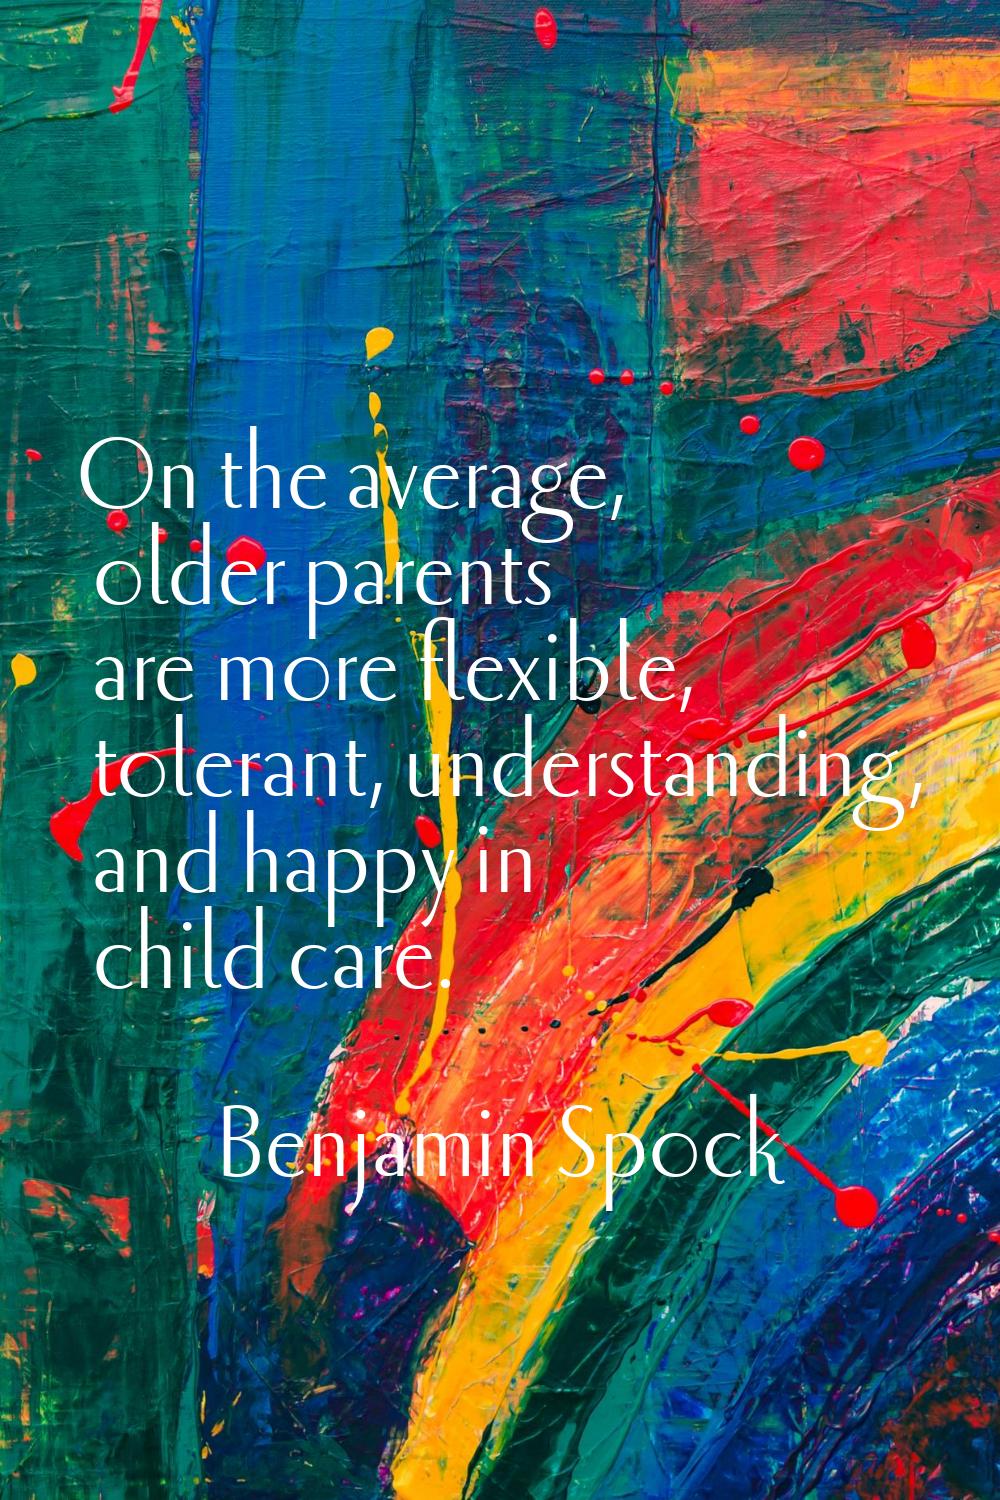 On the average, older parents are more flexible, tolerant, understanding, and happy in child care.